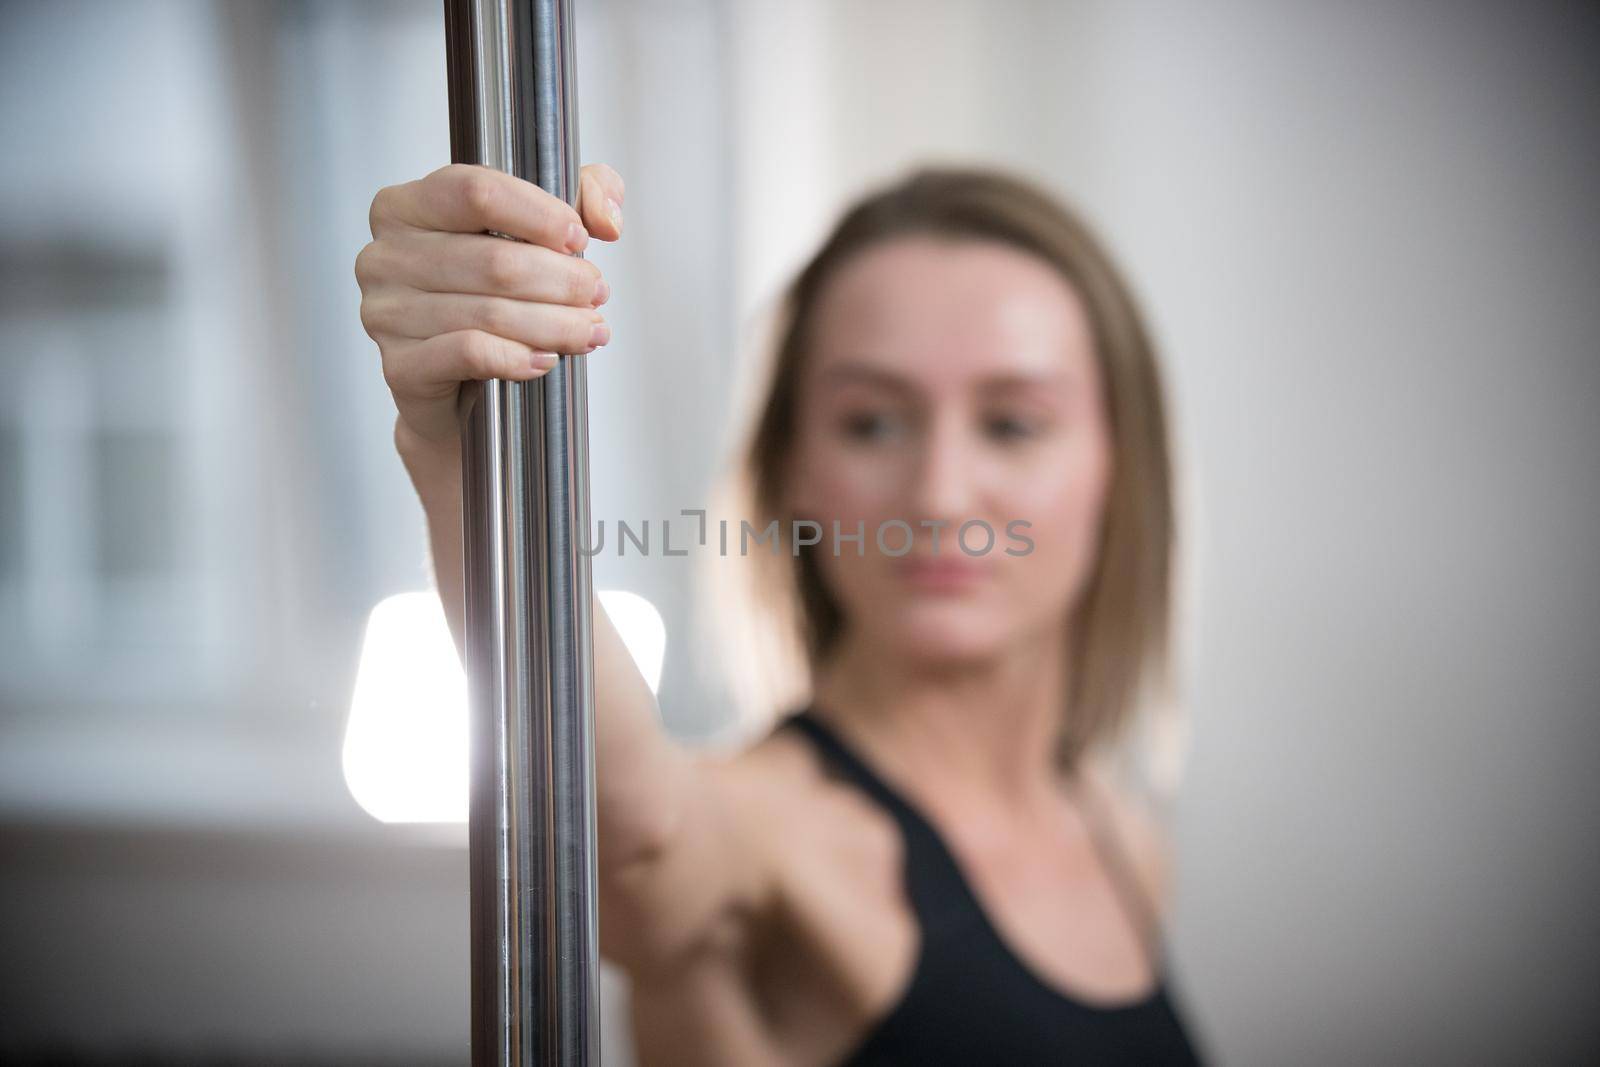 Young attractive woman in sport bra holding a pole. Pole close up